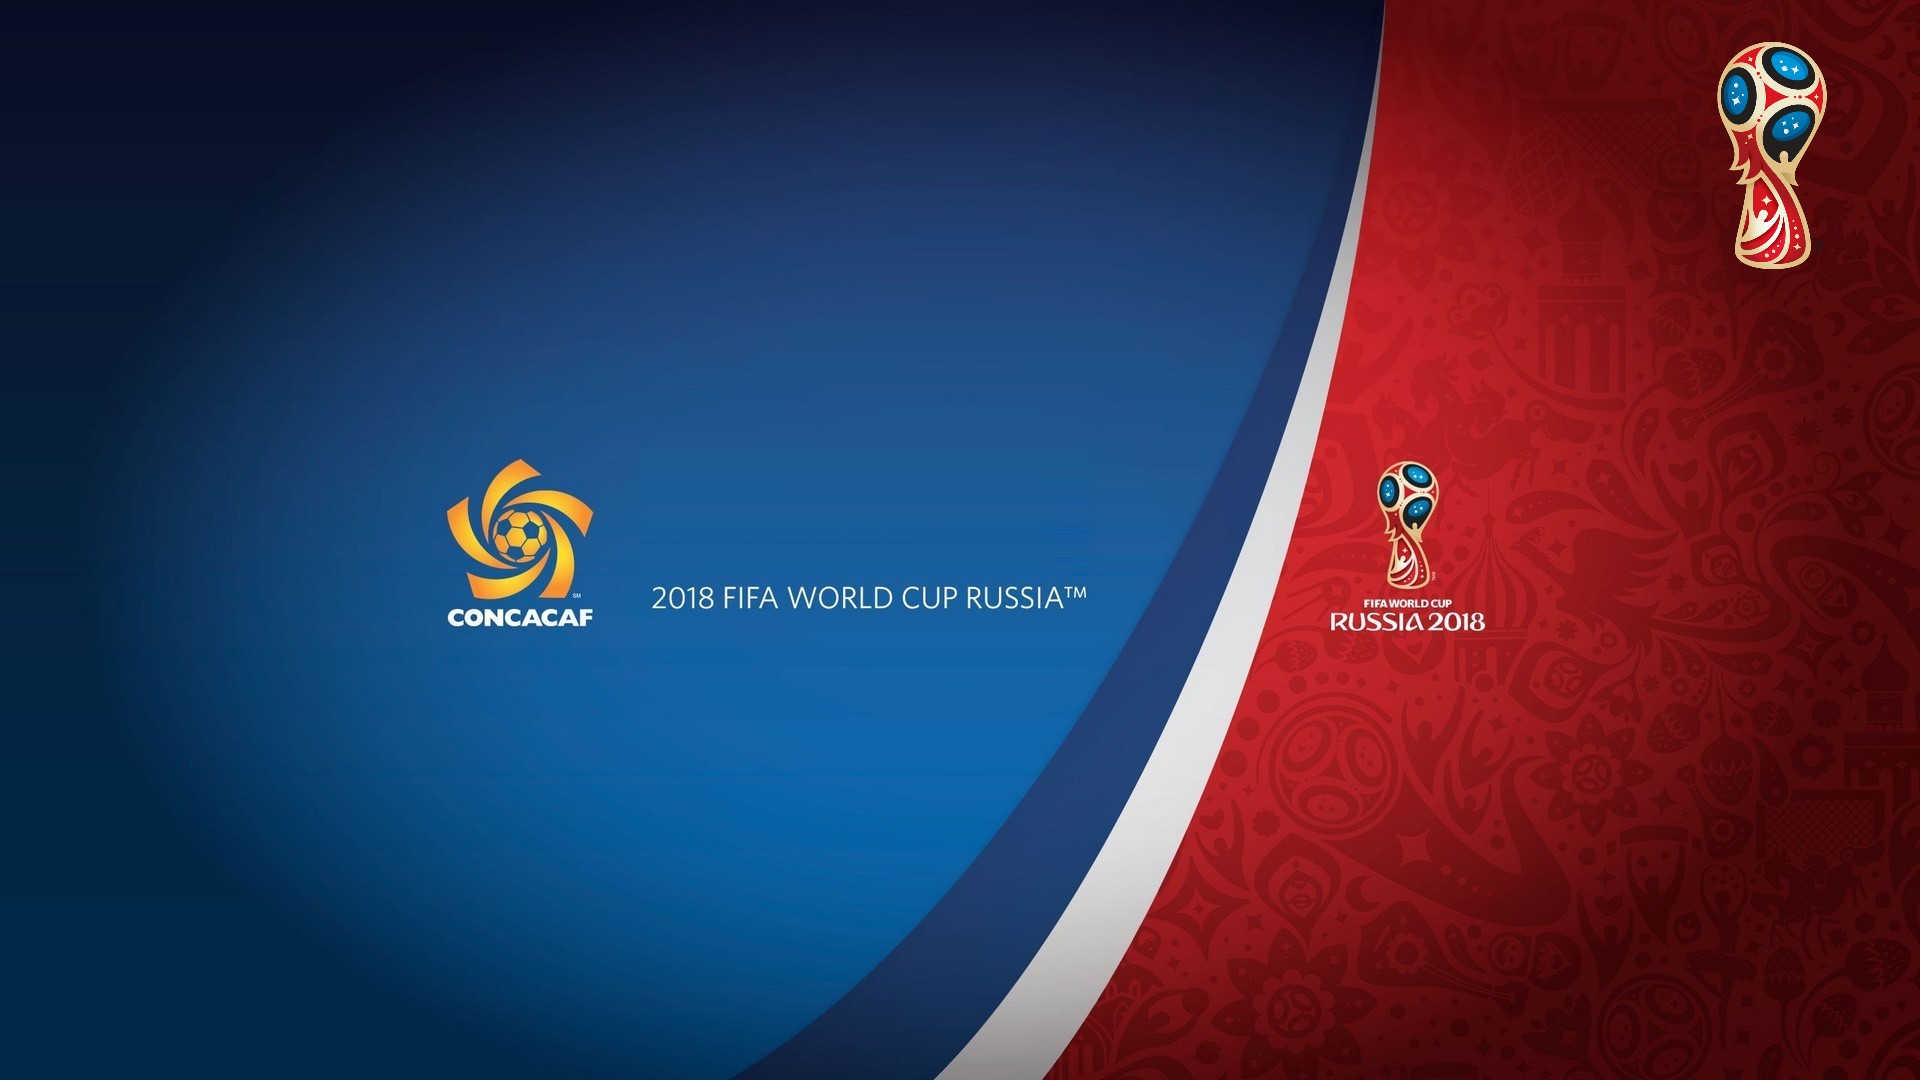 HD FIFA World Cup Backgrounds with resolution 1920x1080 pixel. You can make this wallpaper for your Mac or Windows Desktop Background, iPhone, Android or Tablet and another Smartphone device